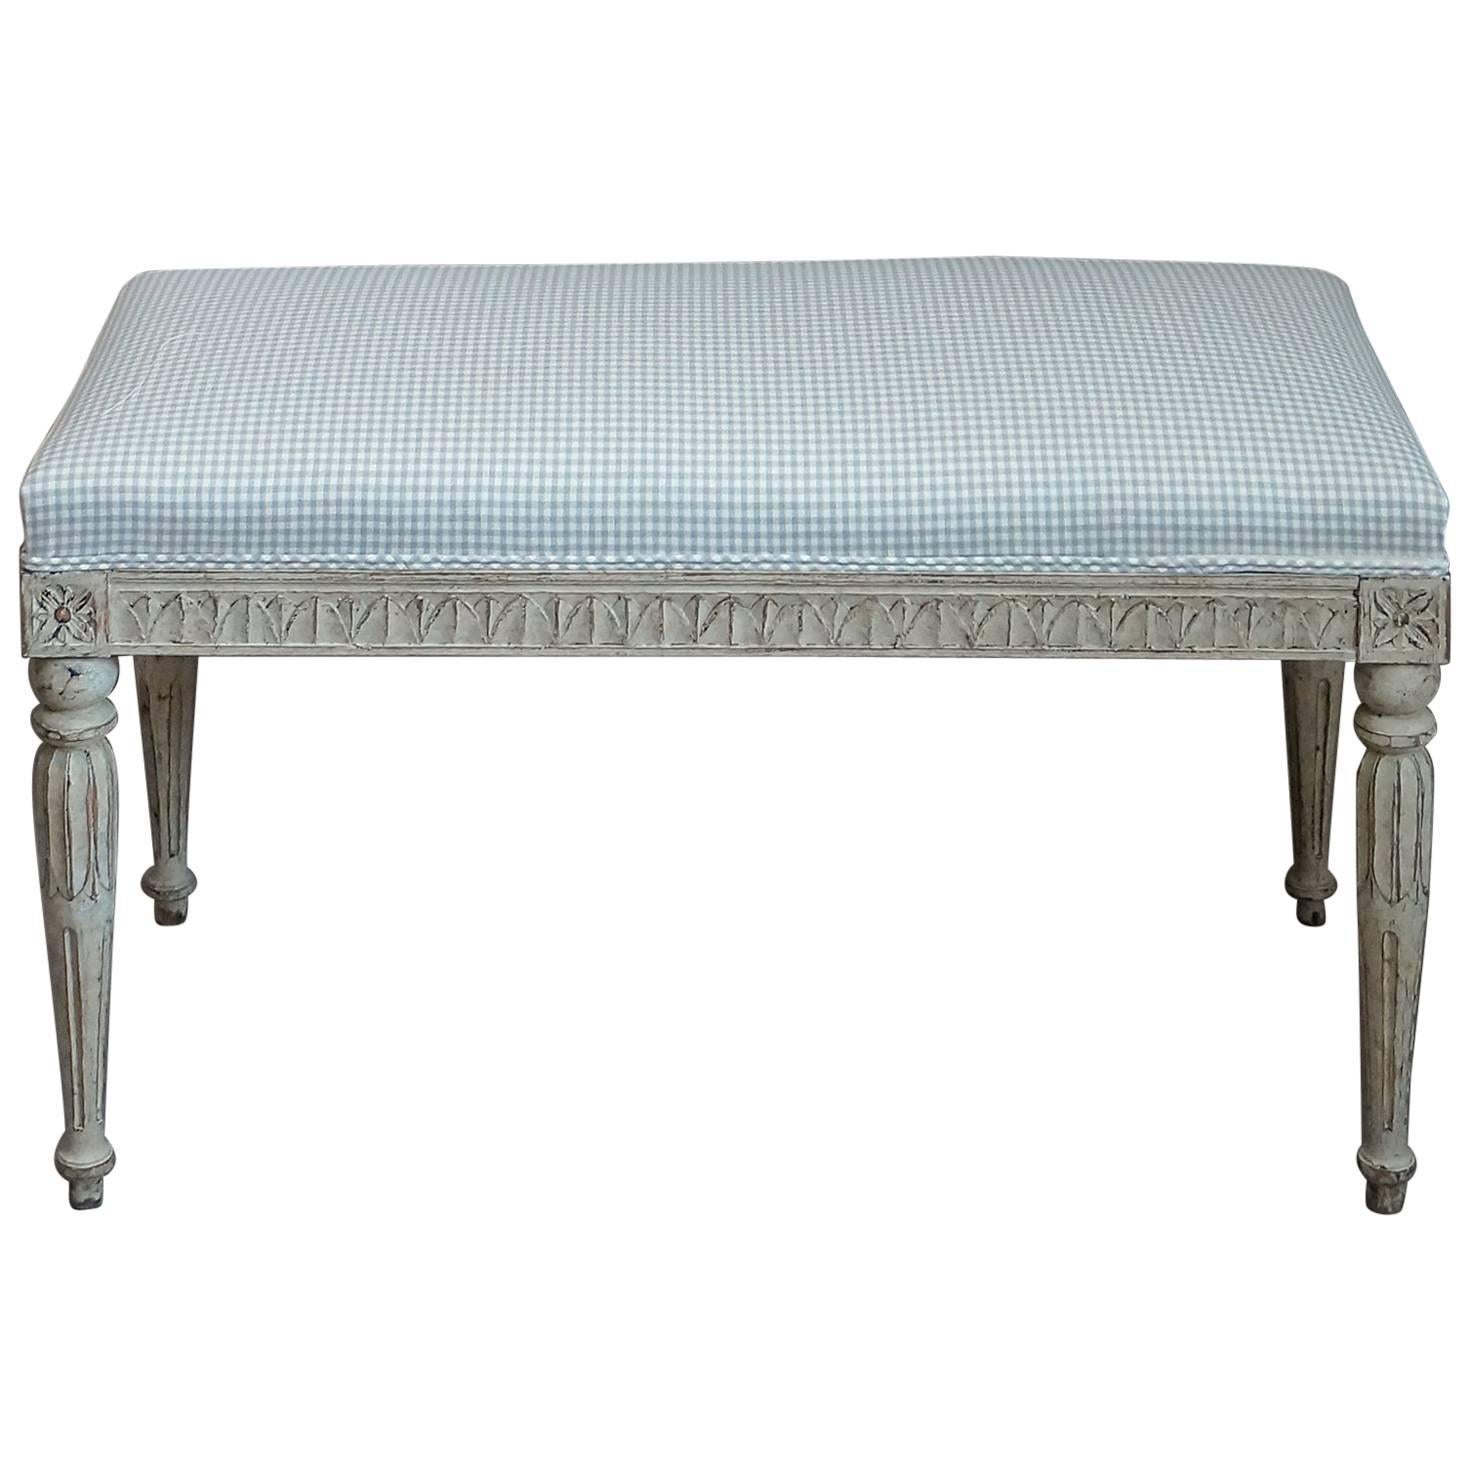 Later Swedish Bench in the Gustavian Style